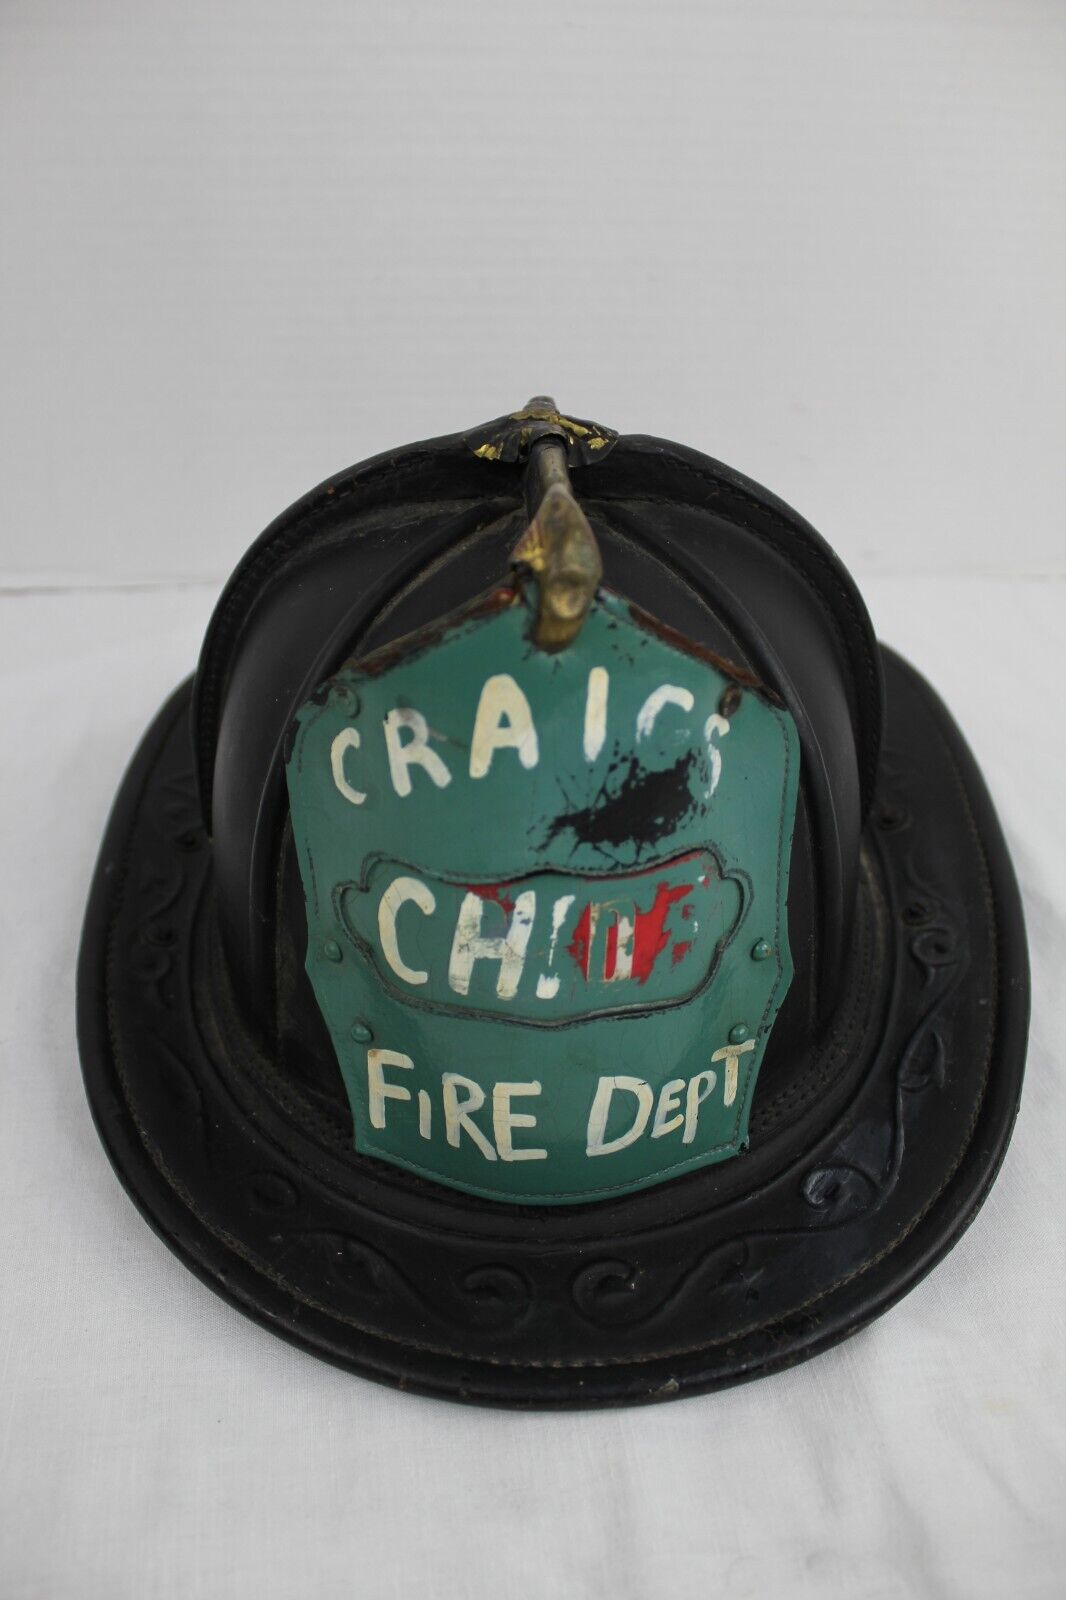 VINTAGE Cairns & Brothers Fire Equipment Leather Firemans Helmet Chief Craigs FD